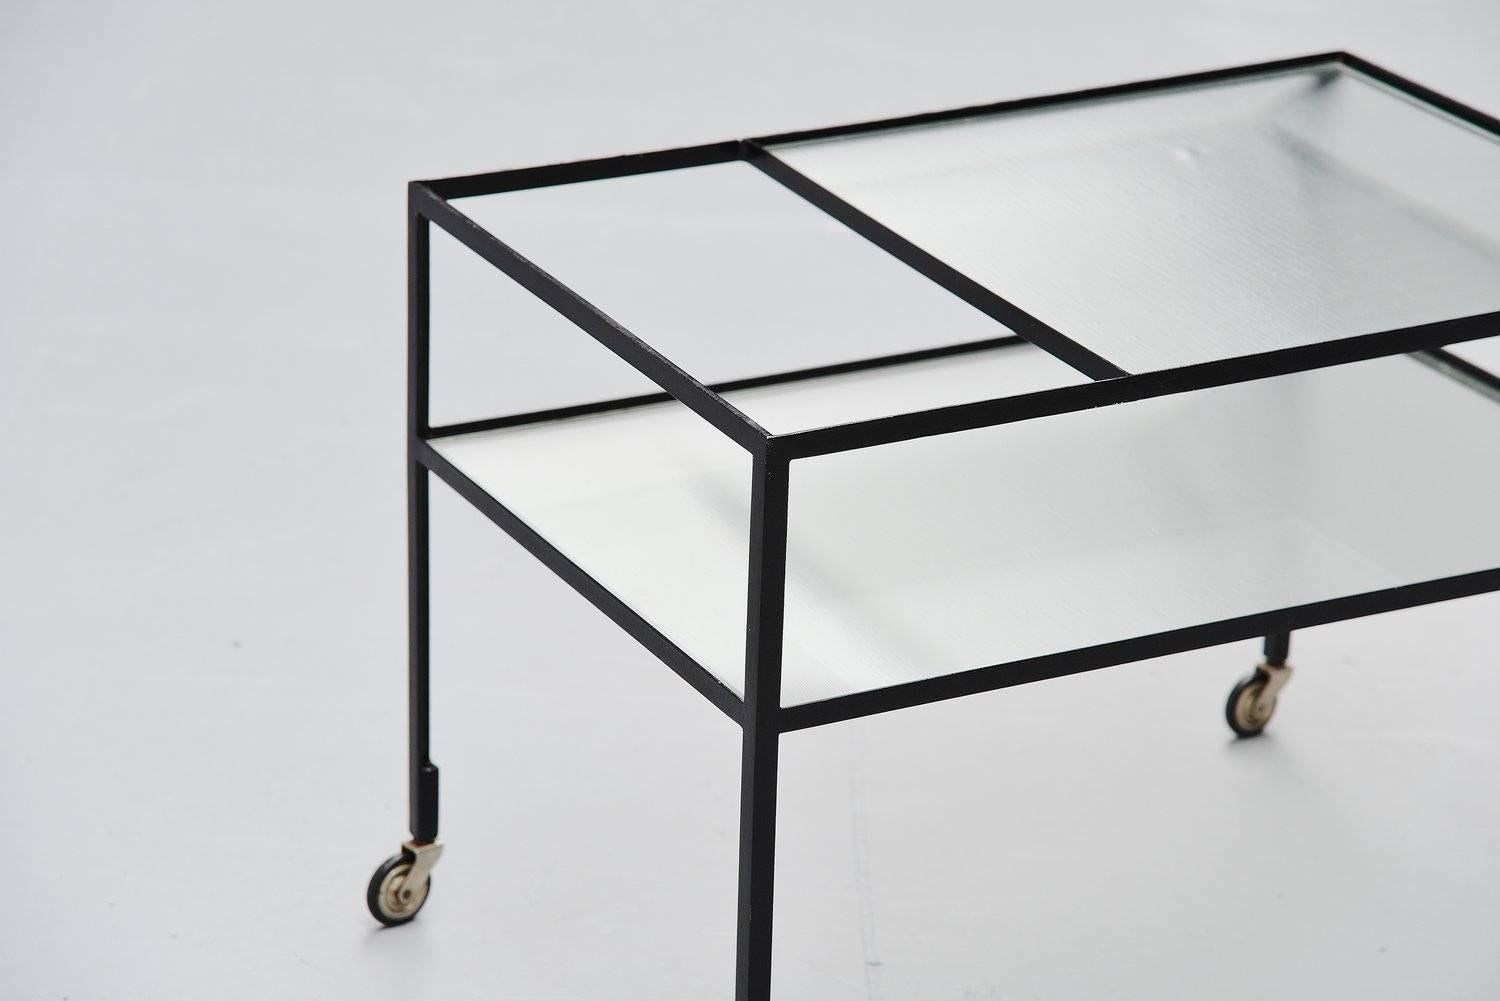 Very nice modernist bar cart designed by Herbert Hirche for Christian Holzäpfel KG, Germany 1956. This modernis shaped ta cart has a solid metal black lacquered frame in wheels, and it has 2 glass tops reinforced with metal wiring. Subtle serving